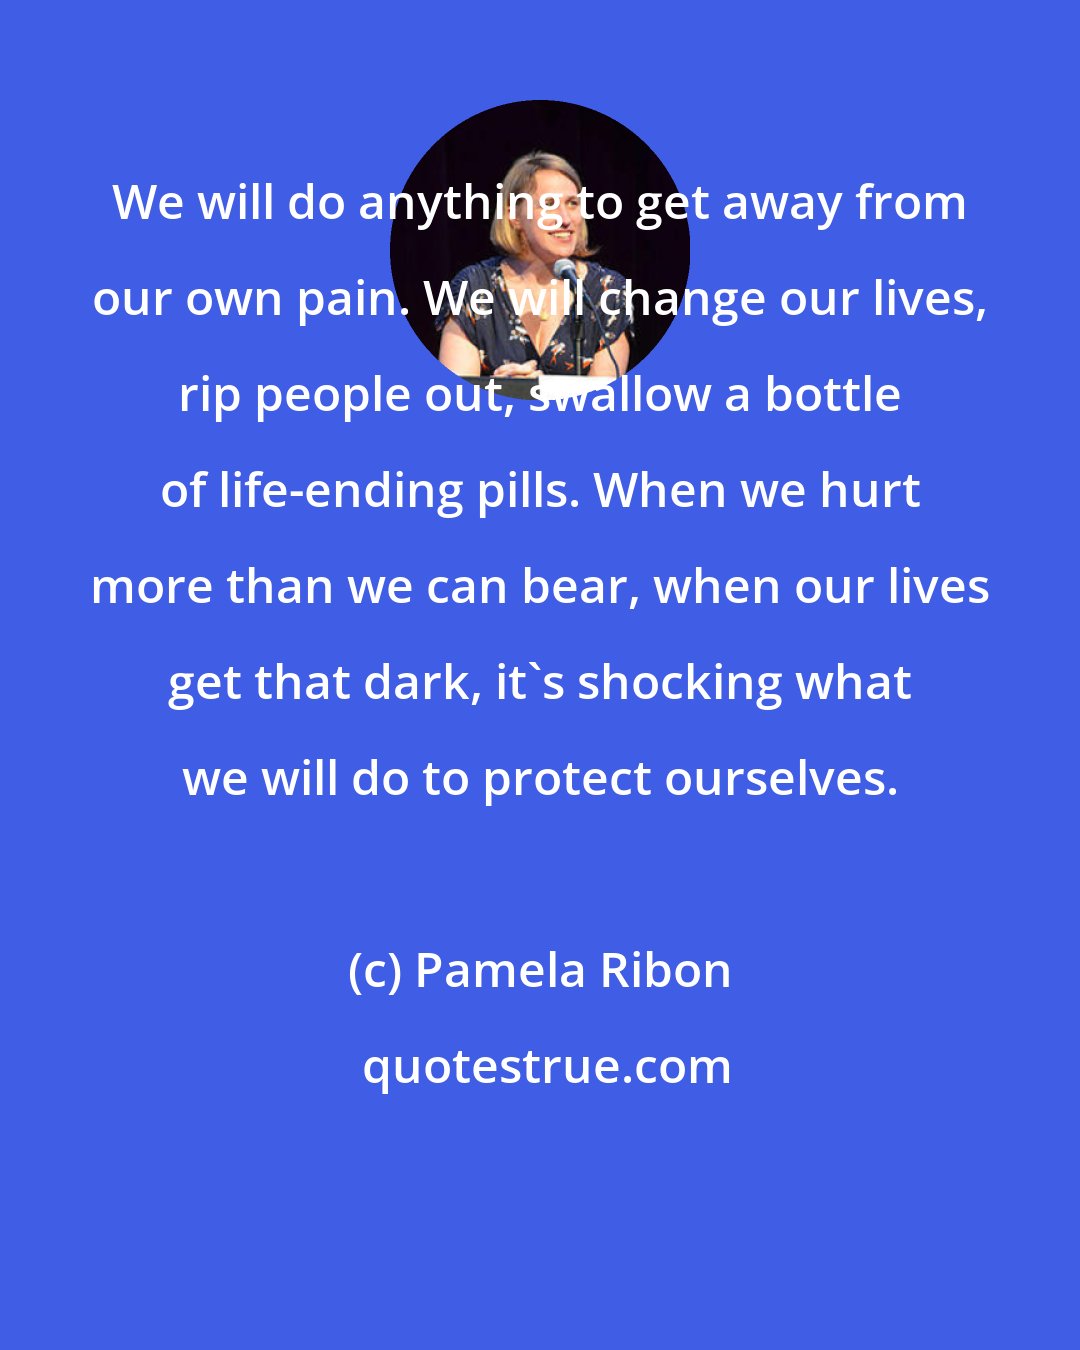 Pamela Ribon: We will do anything to get away from our own pain. We will change our lives, rip people out, swallow a bottle of life-ending pills. When we hurt more than we can bear, when our lives get that dark, it's shocking what we will do to protect ourselves.